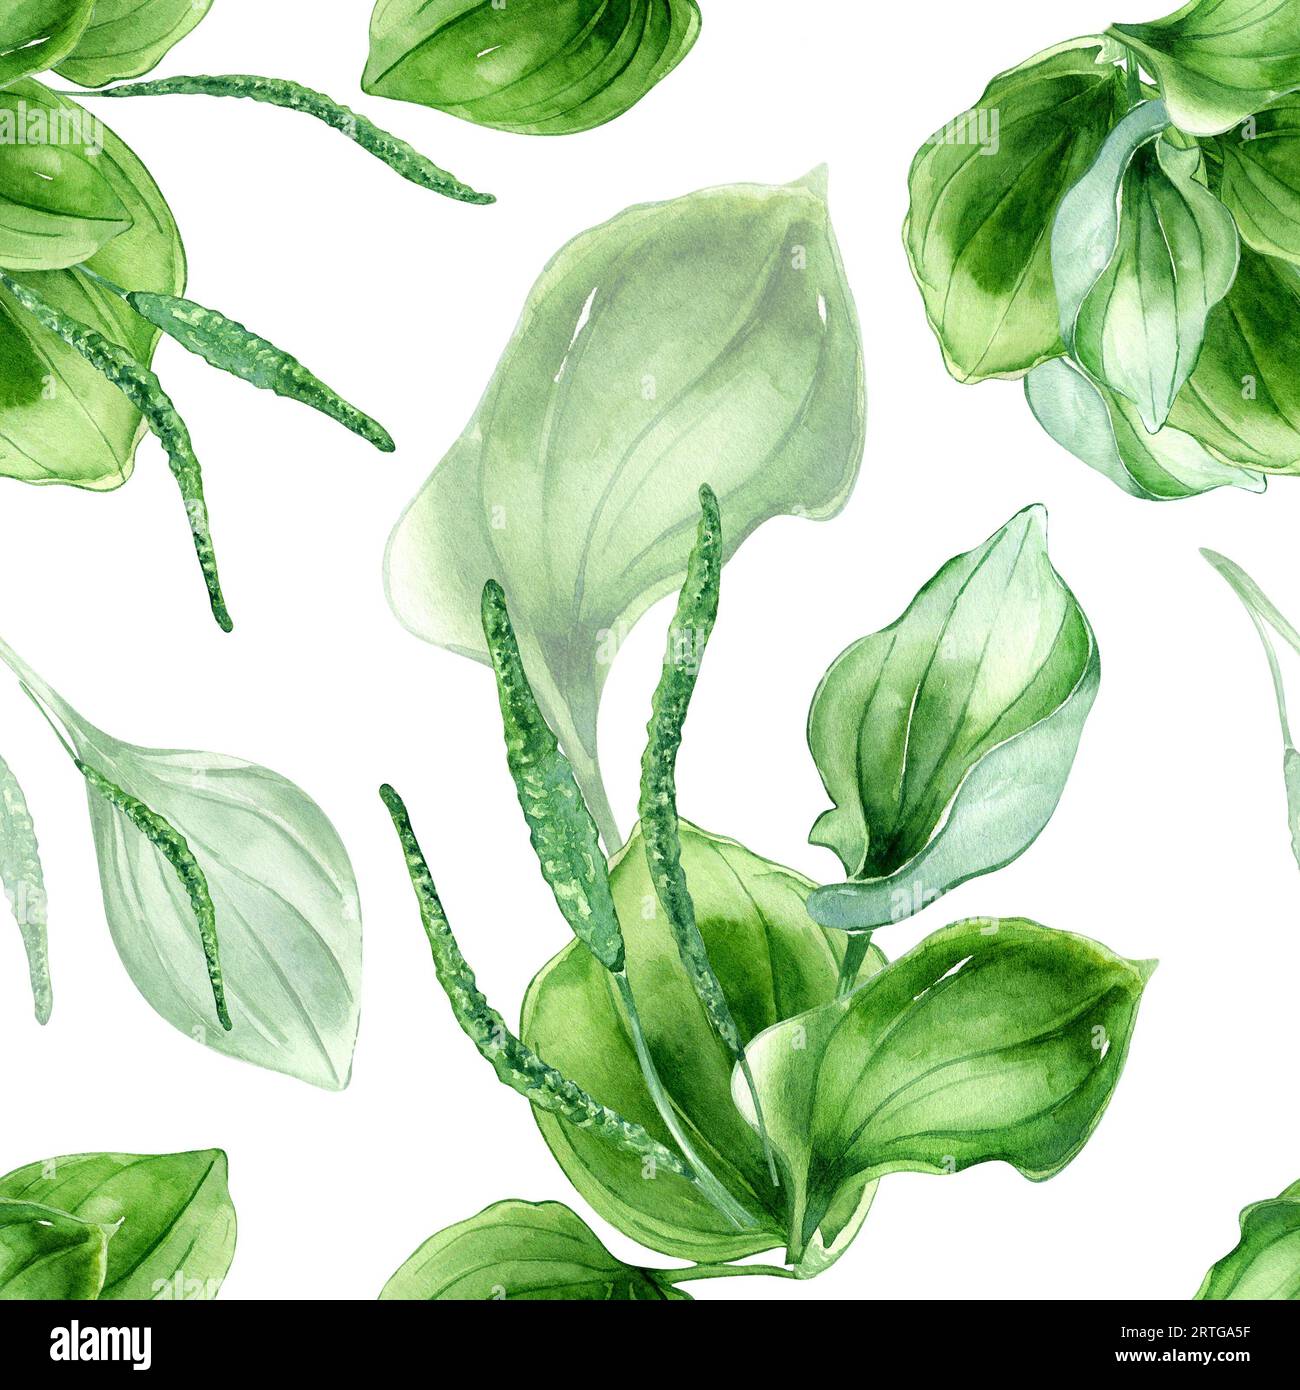 Plantago broadleaf medicinal plant watercolor seamless pattern isolated on white background. Plantain, green leaves, herb, psyllium hand drawn. Design Stock Photo